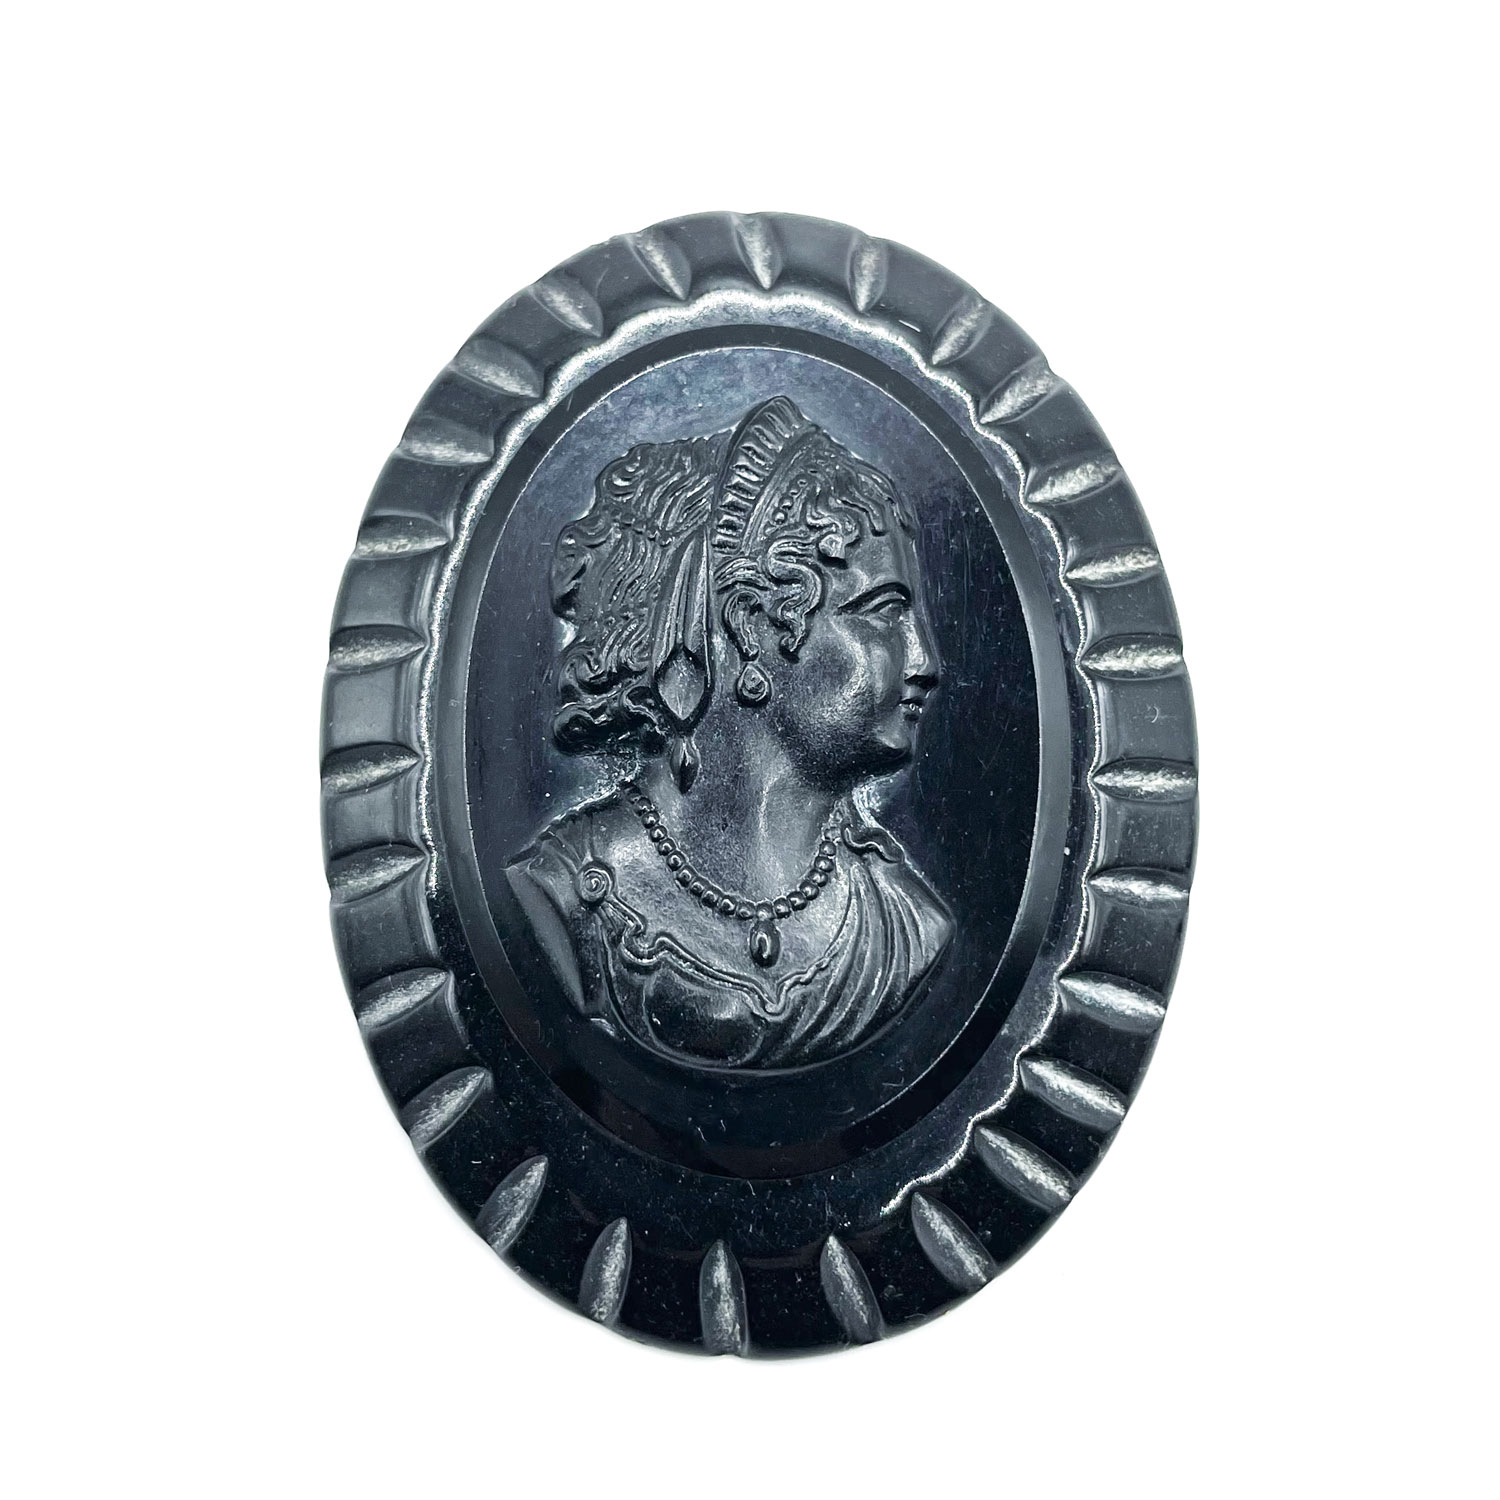 1940s lucite and bakelite cameo brooch